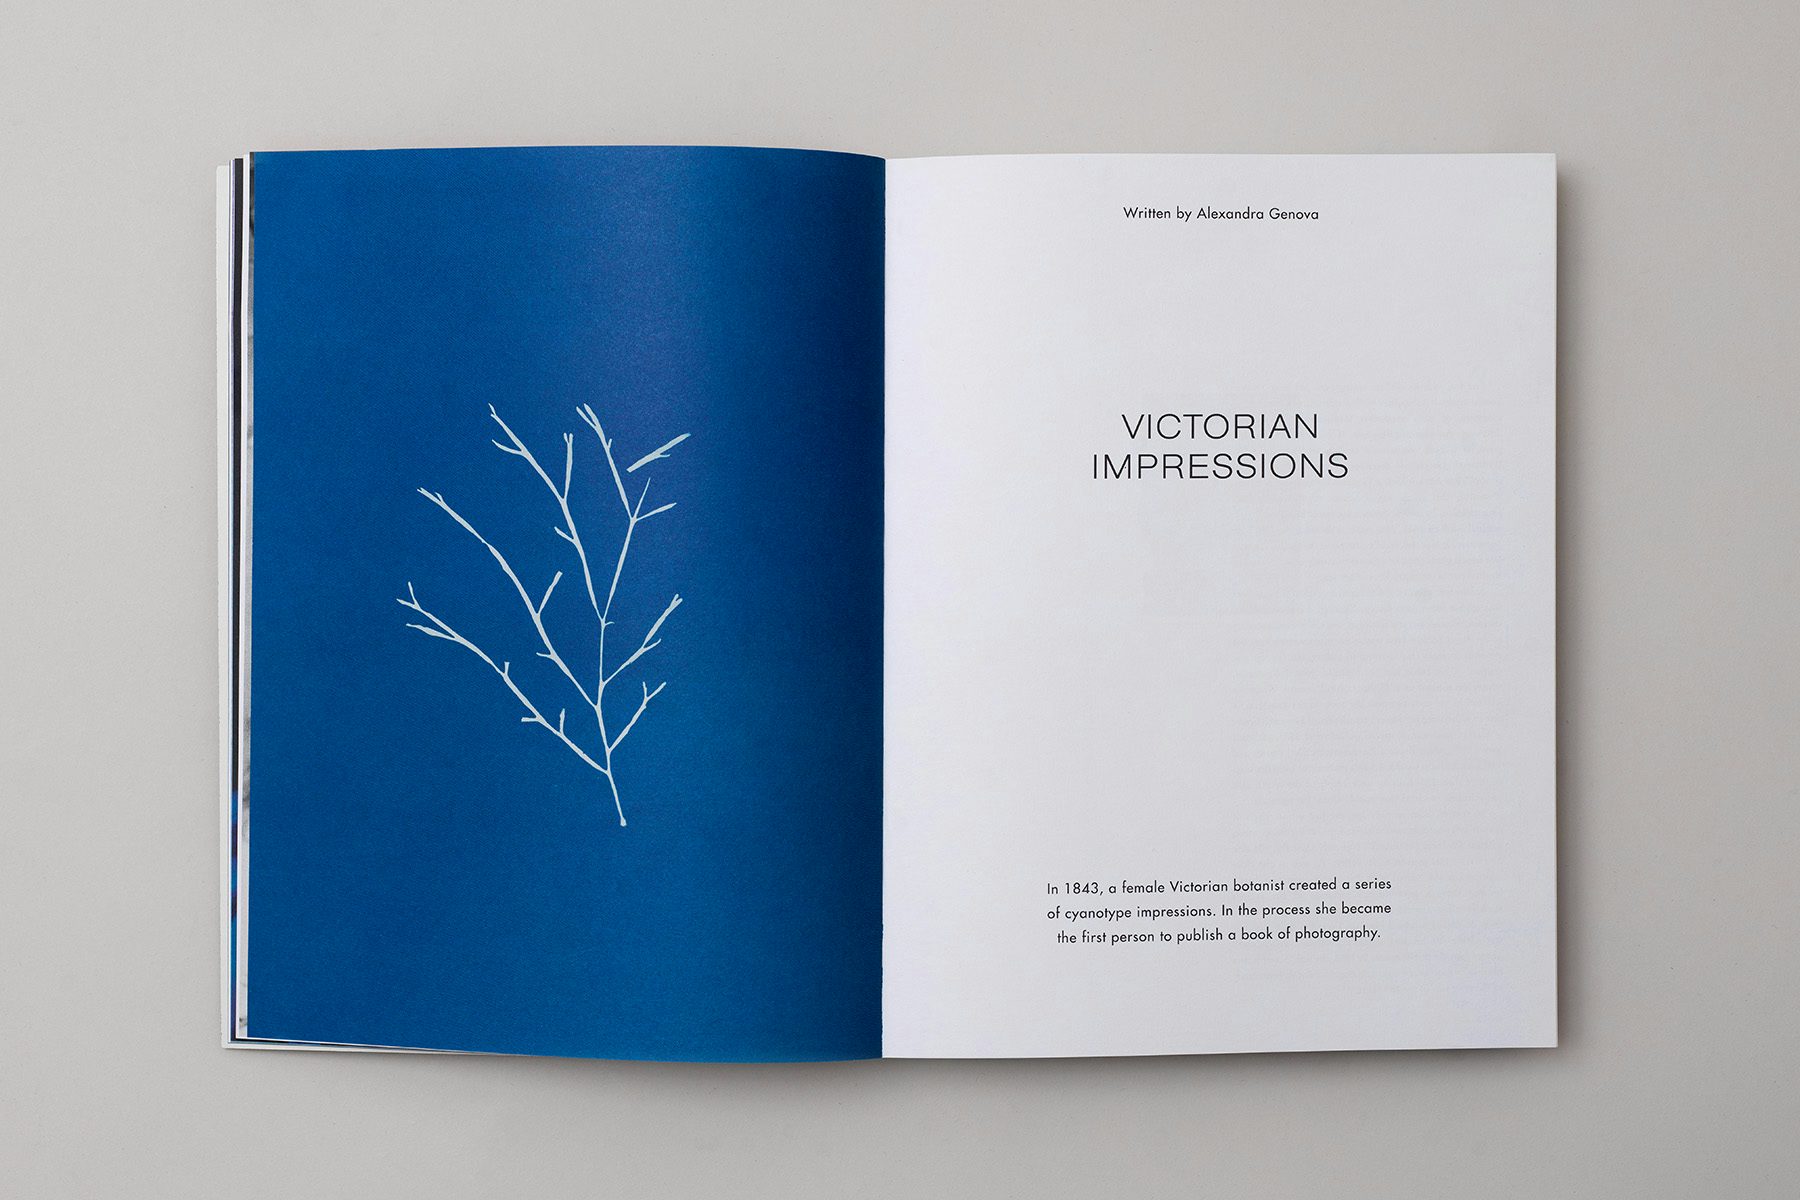 Photograph of a spread from the Blue issue of The Colour Journal, showing a blue cyanotype of a branch on the left page and text on the right page headlined 'Victorian impressions'